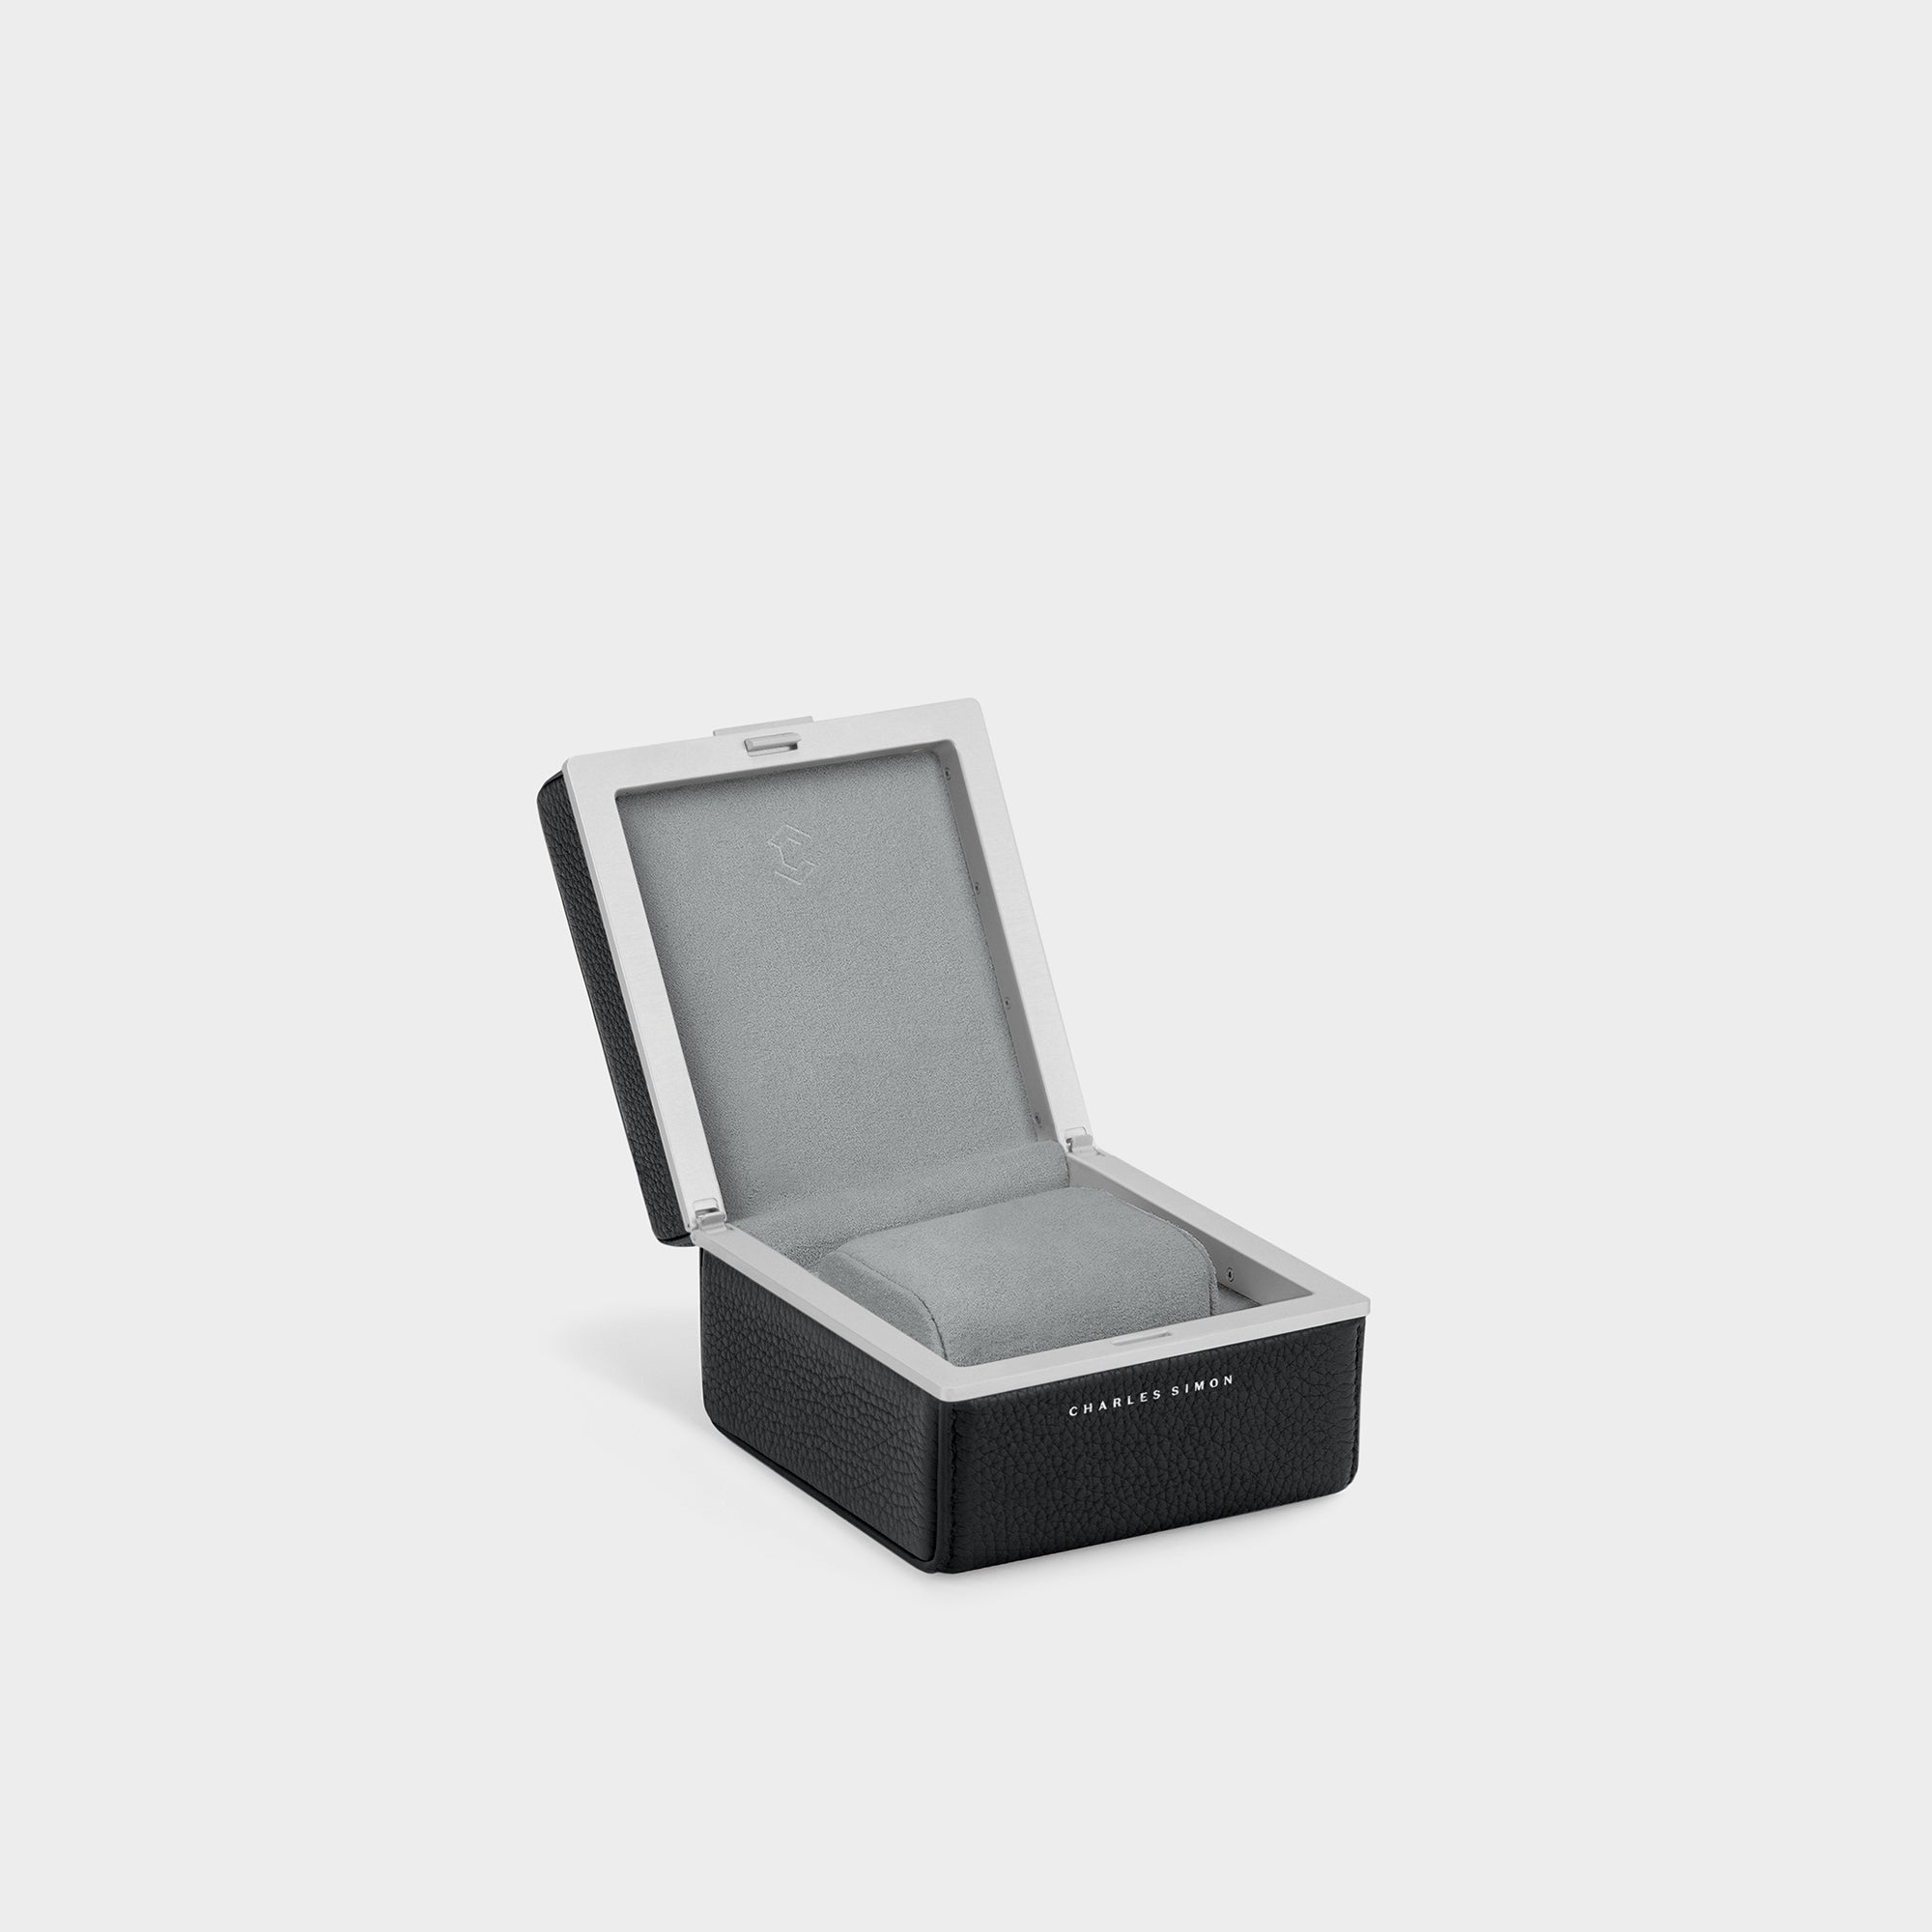 Eaton 1 watch case for 1 watch handmade from black French leather, anodized aluminum and grey Alcantara interior